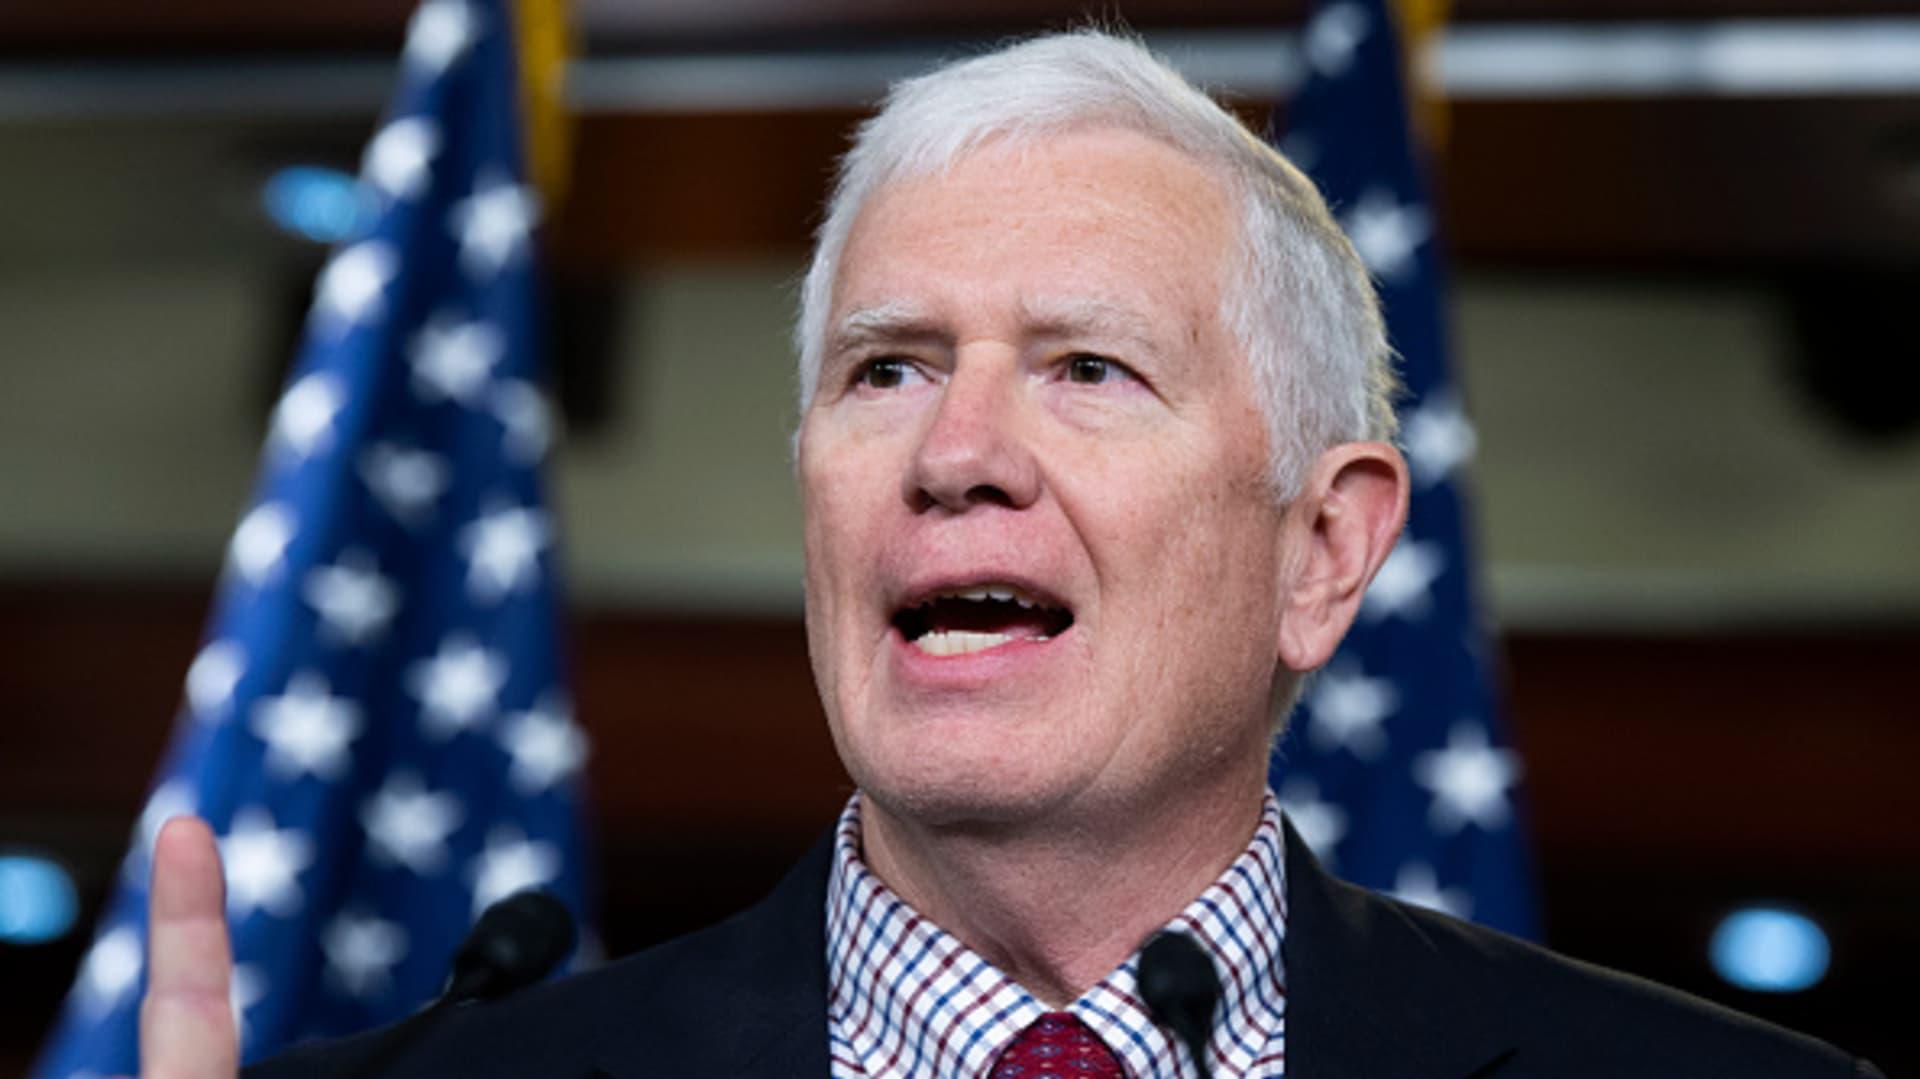 Mo Brooks says Trump asked him to rescind election remove Biden